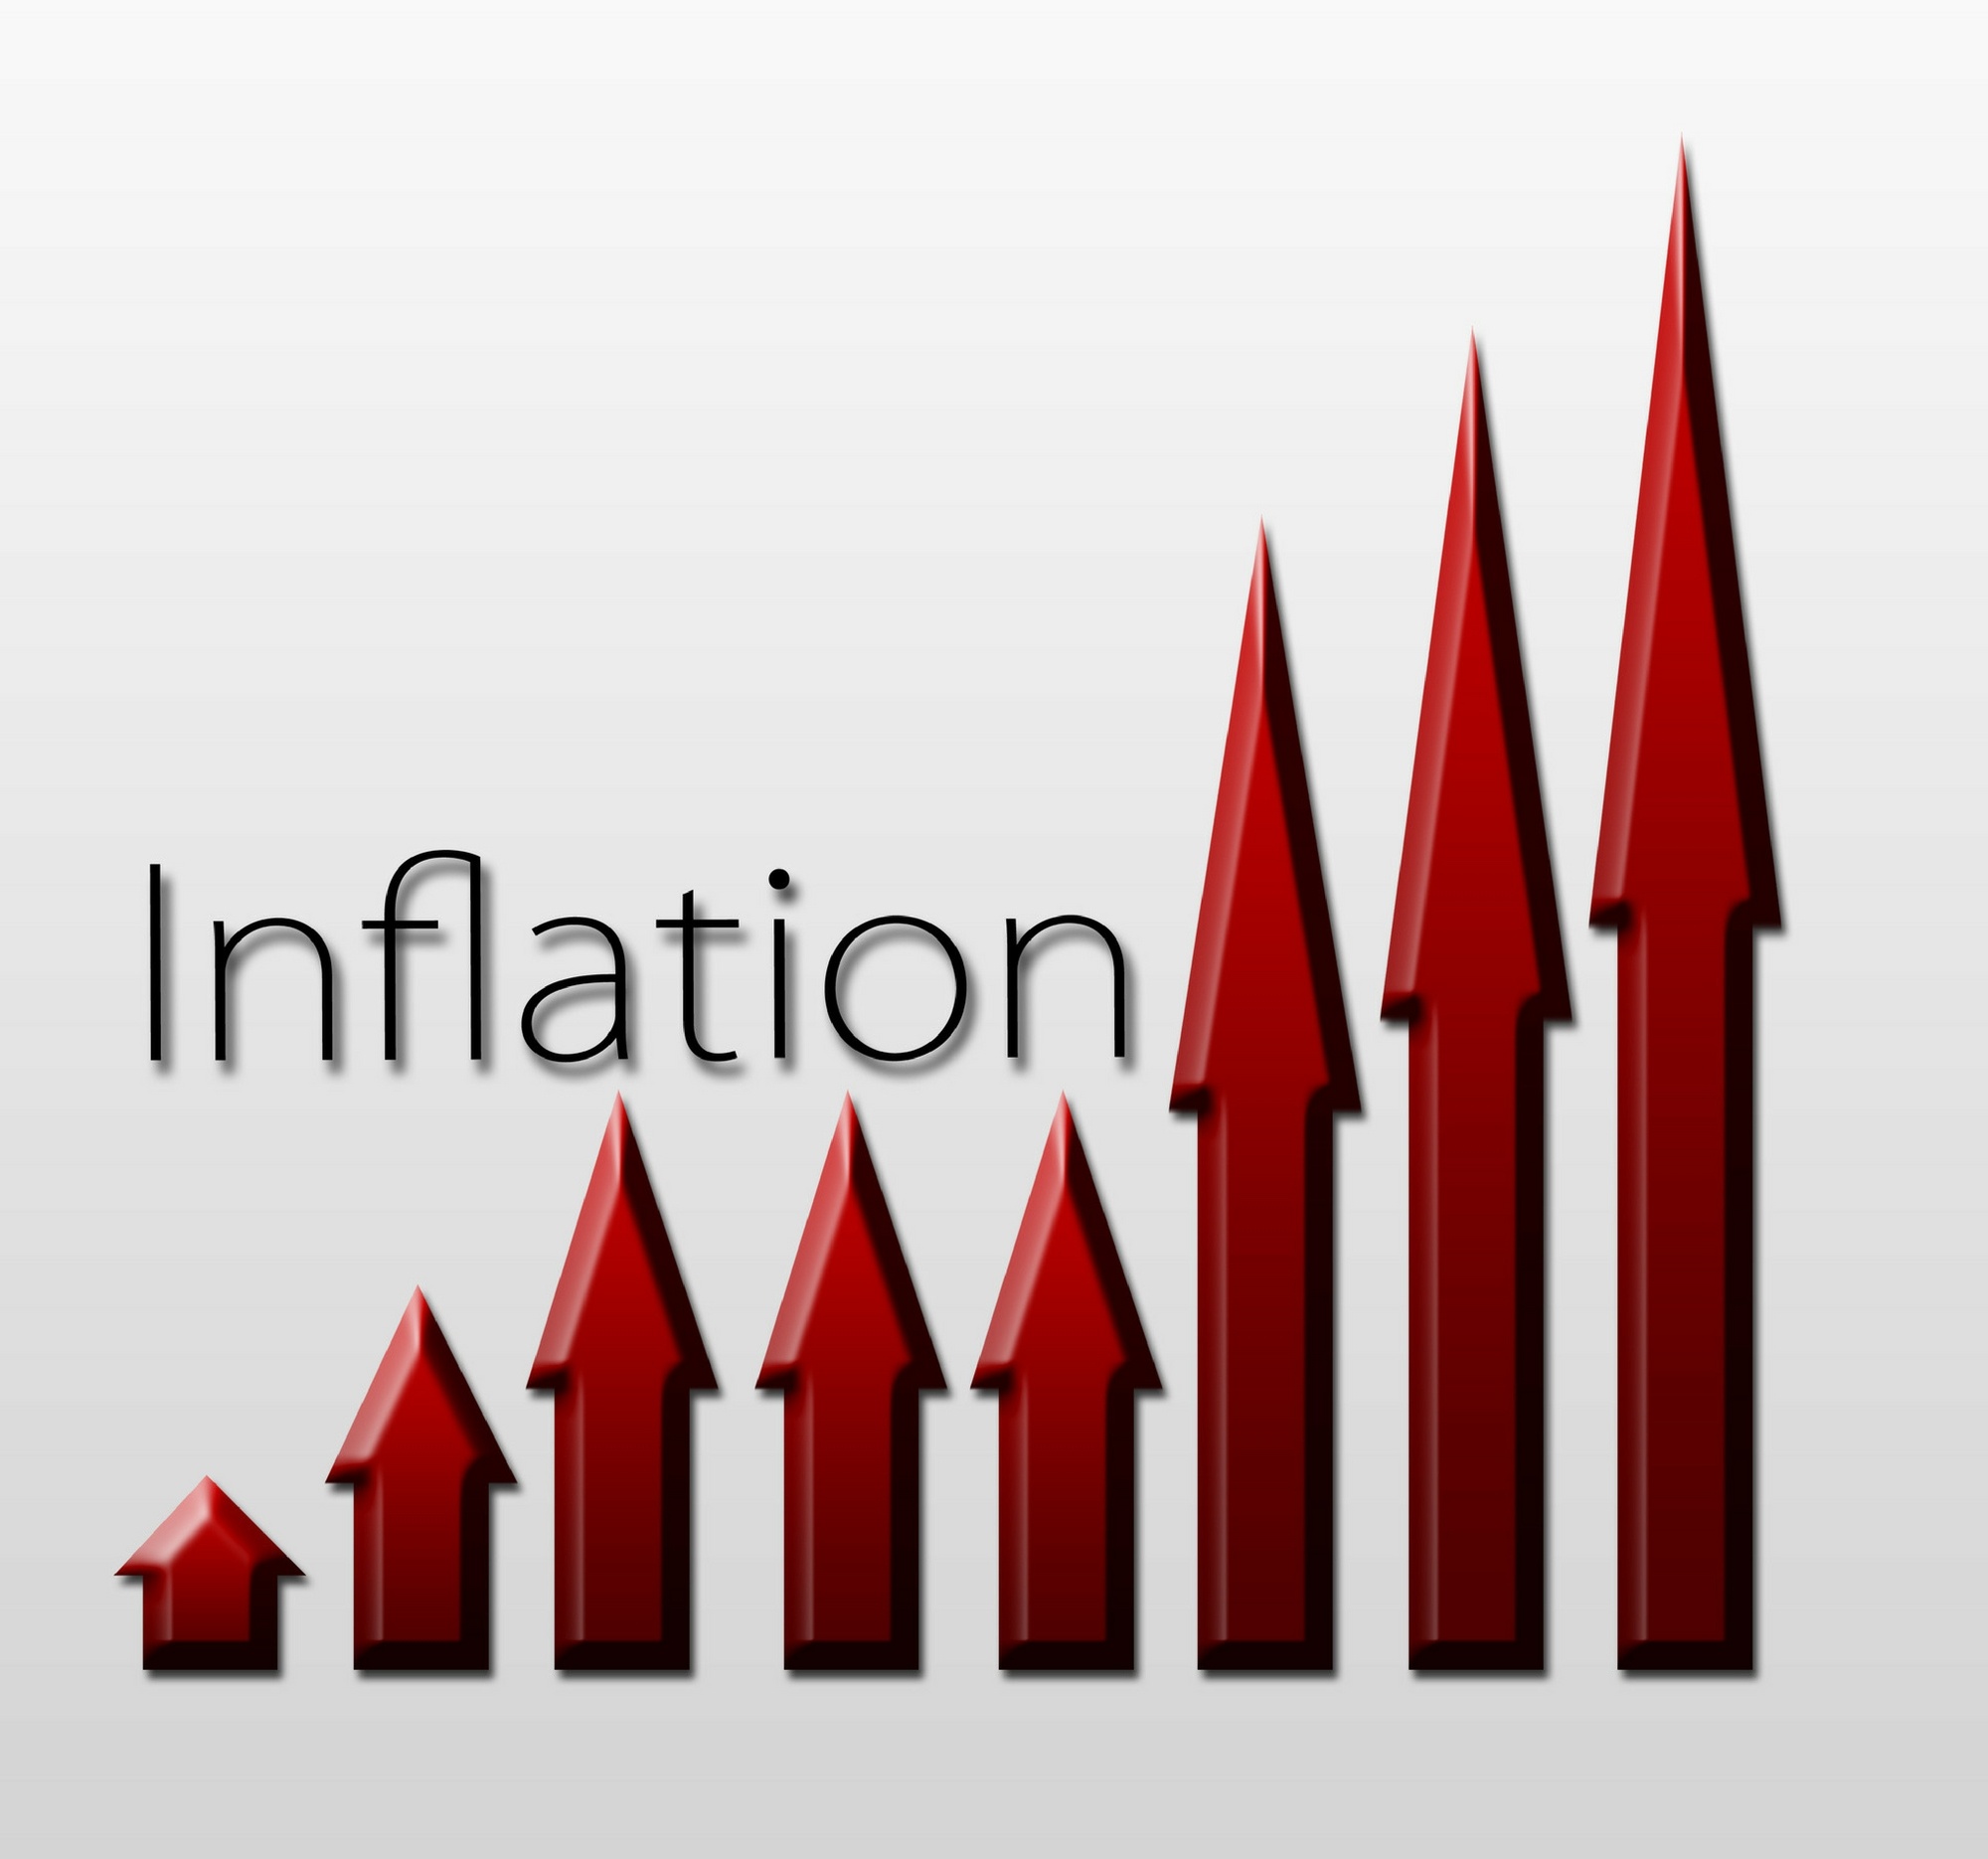 Inflation Everything You Need To Know About Inflation And Why We Need